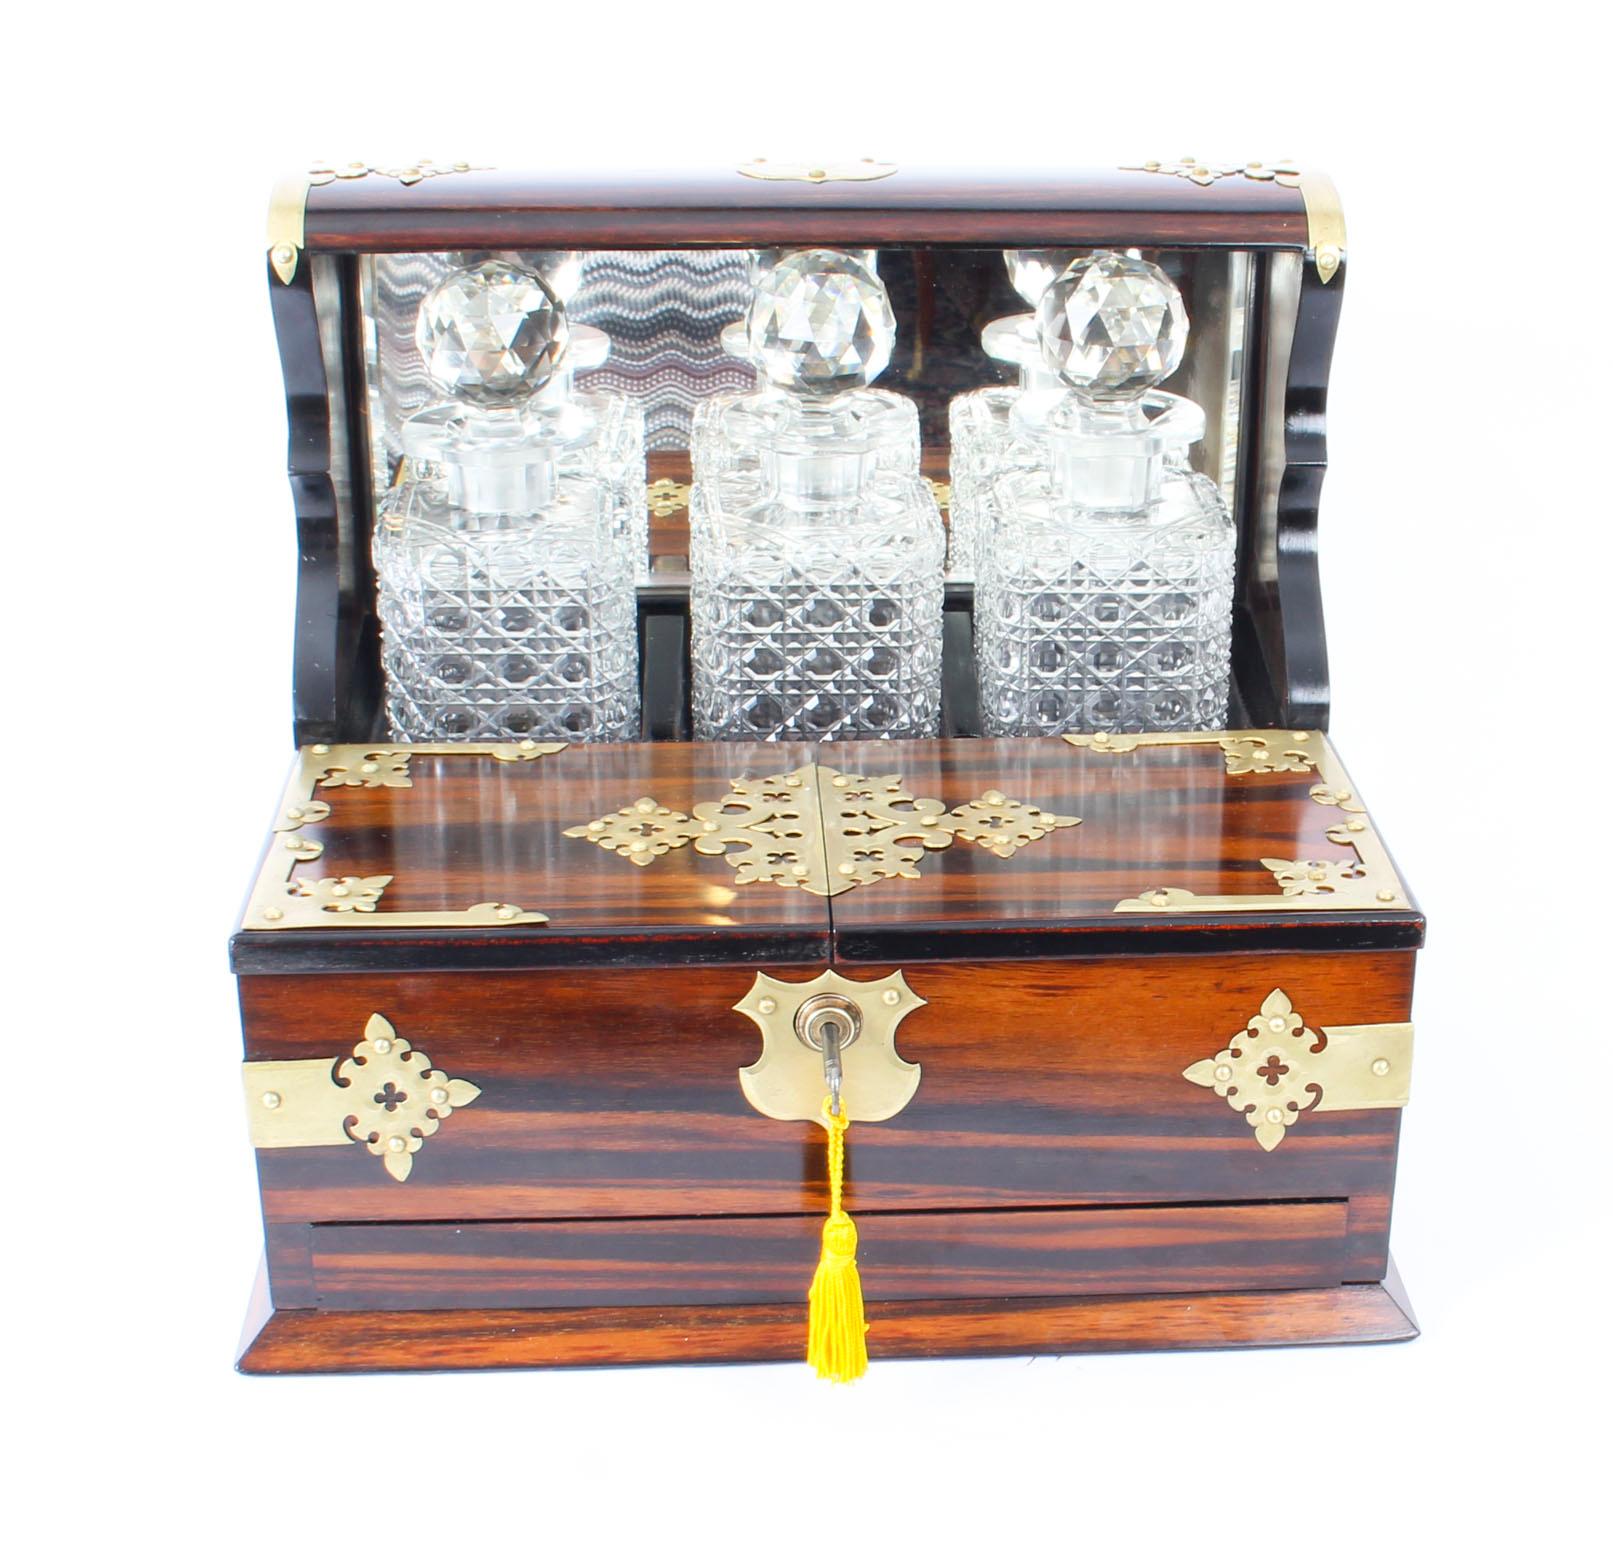 This is a superb antique Victorian coromandel cased three decanter tantalus and games compendium, circa 1880 in date.

It was skillfully crafted in rare coromandel with cut brass mounts, three cut crystal glass decanters with stoppers, a mirrored